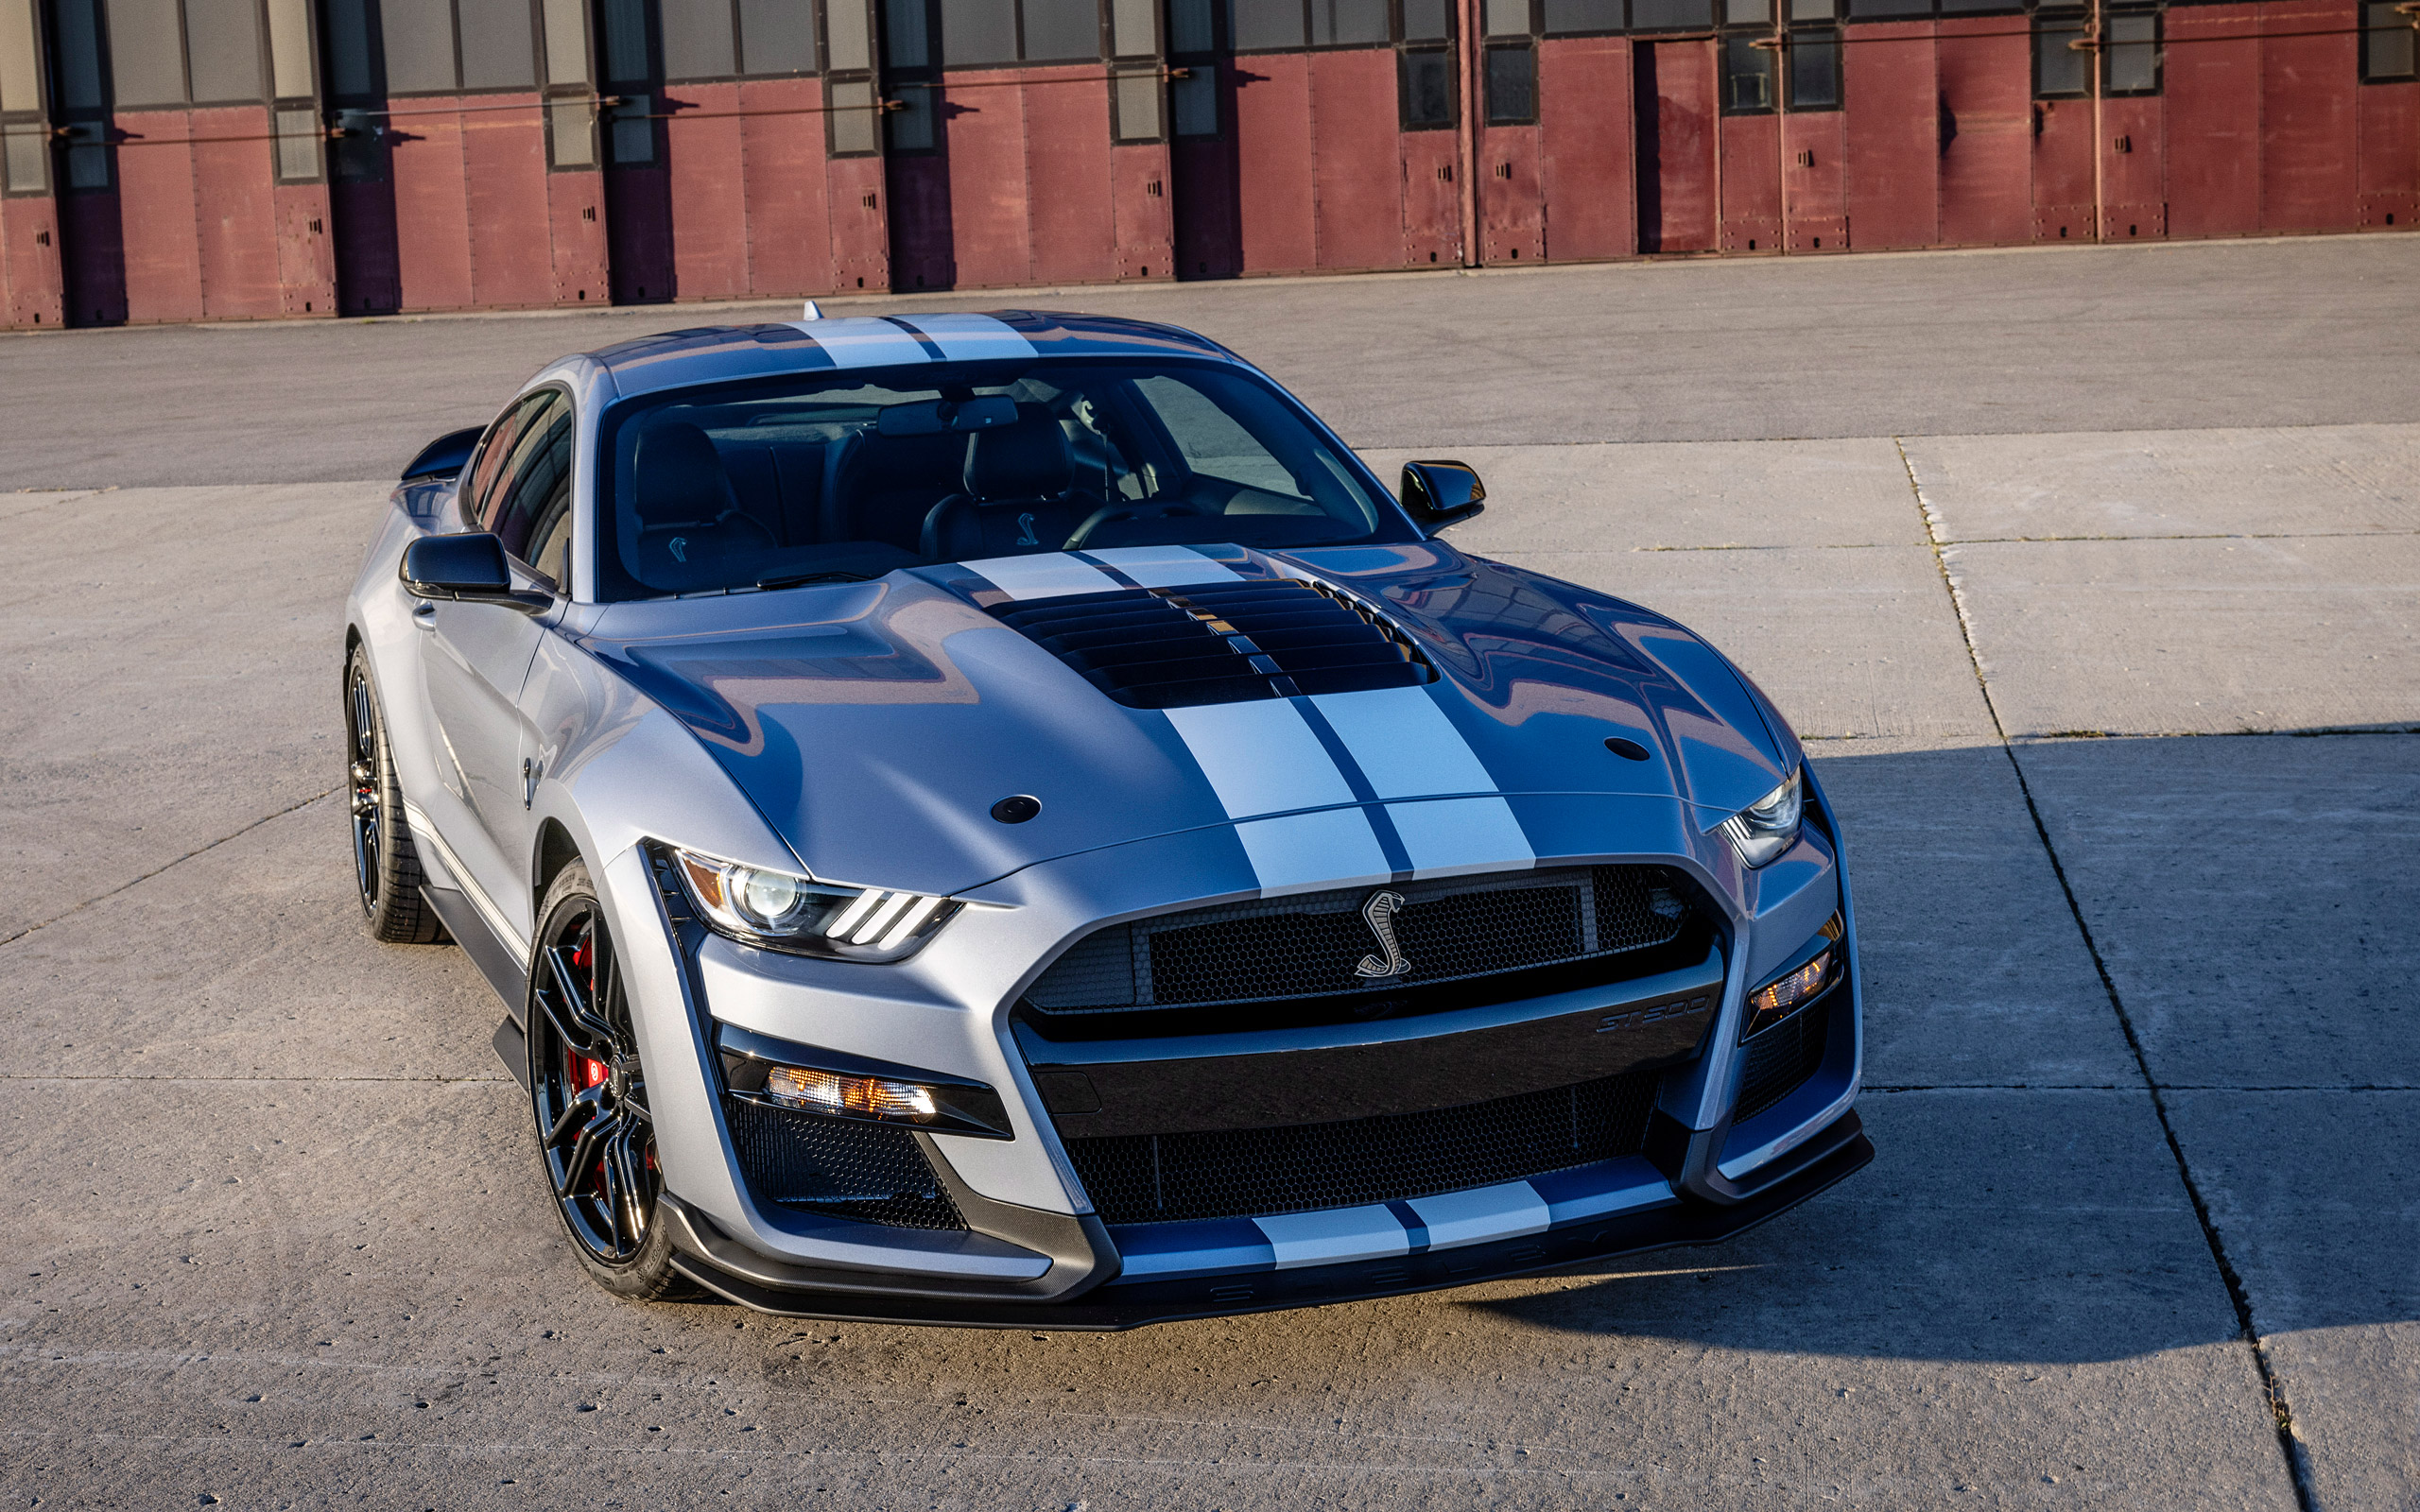  2022 Ford Mustang Shelby GT500 Wallpaper.